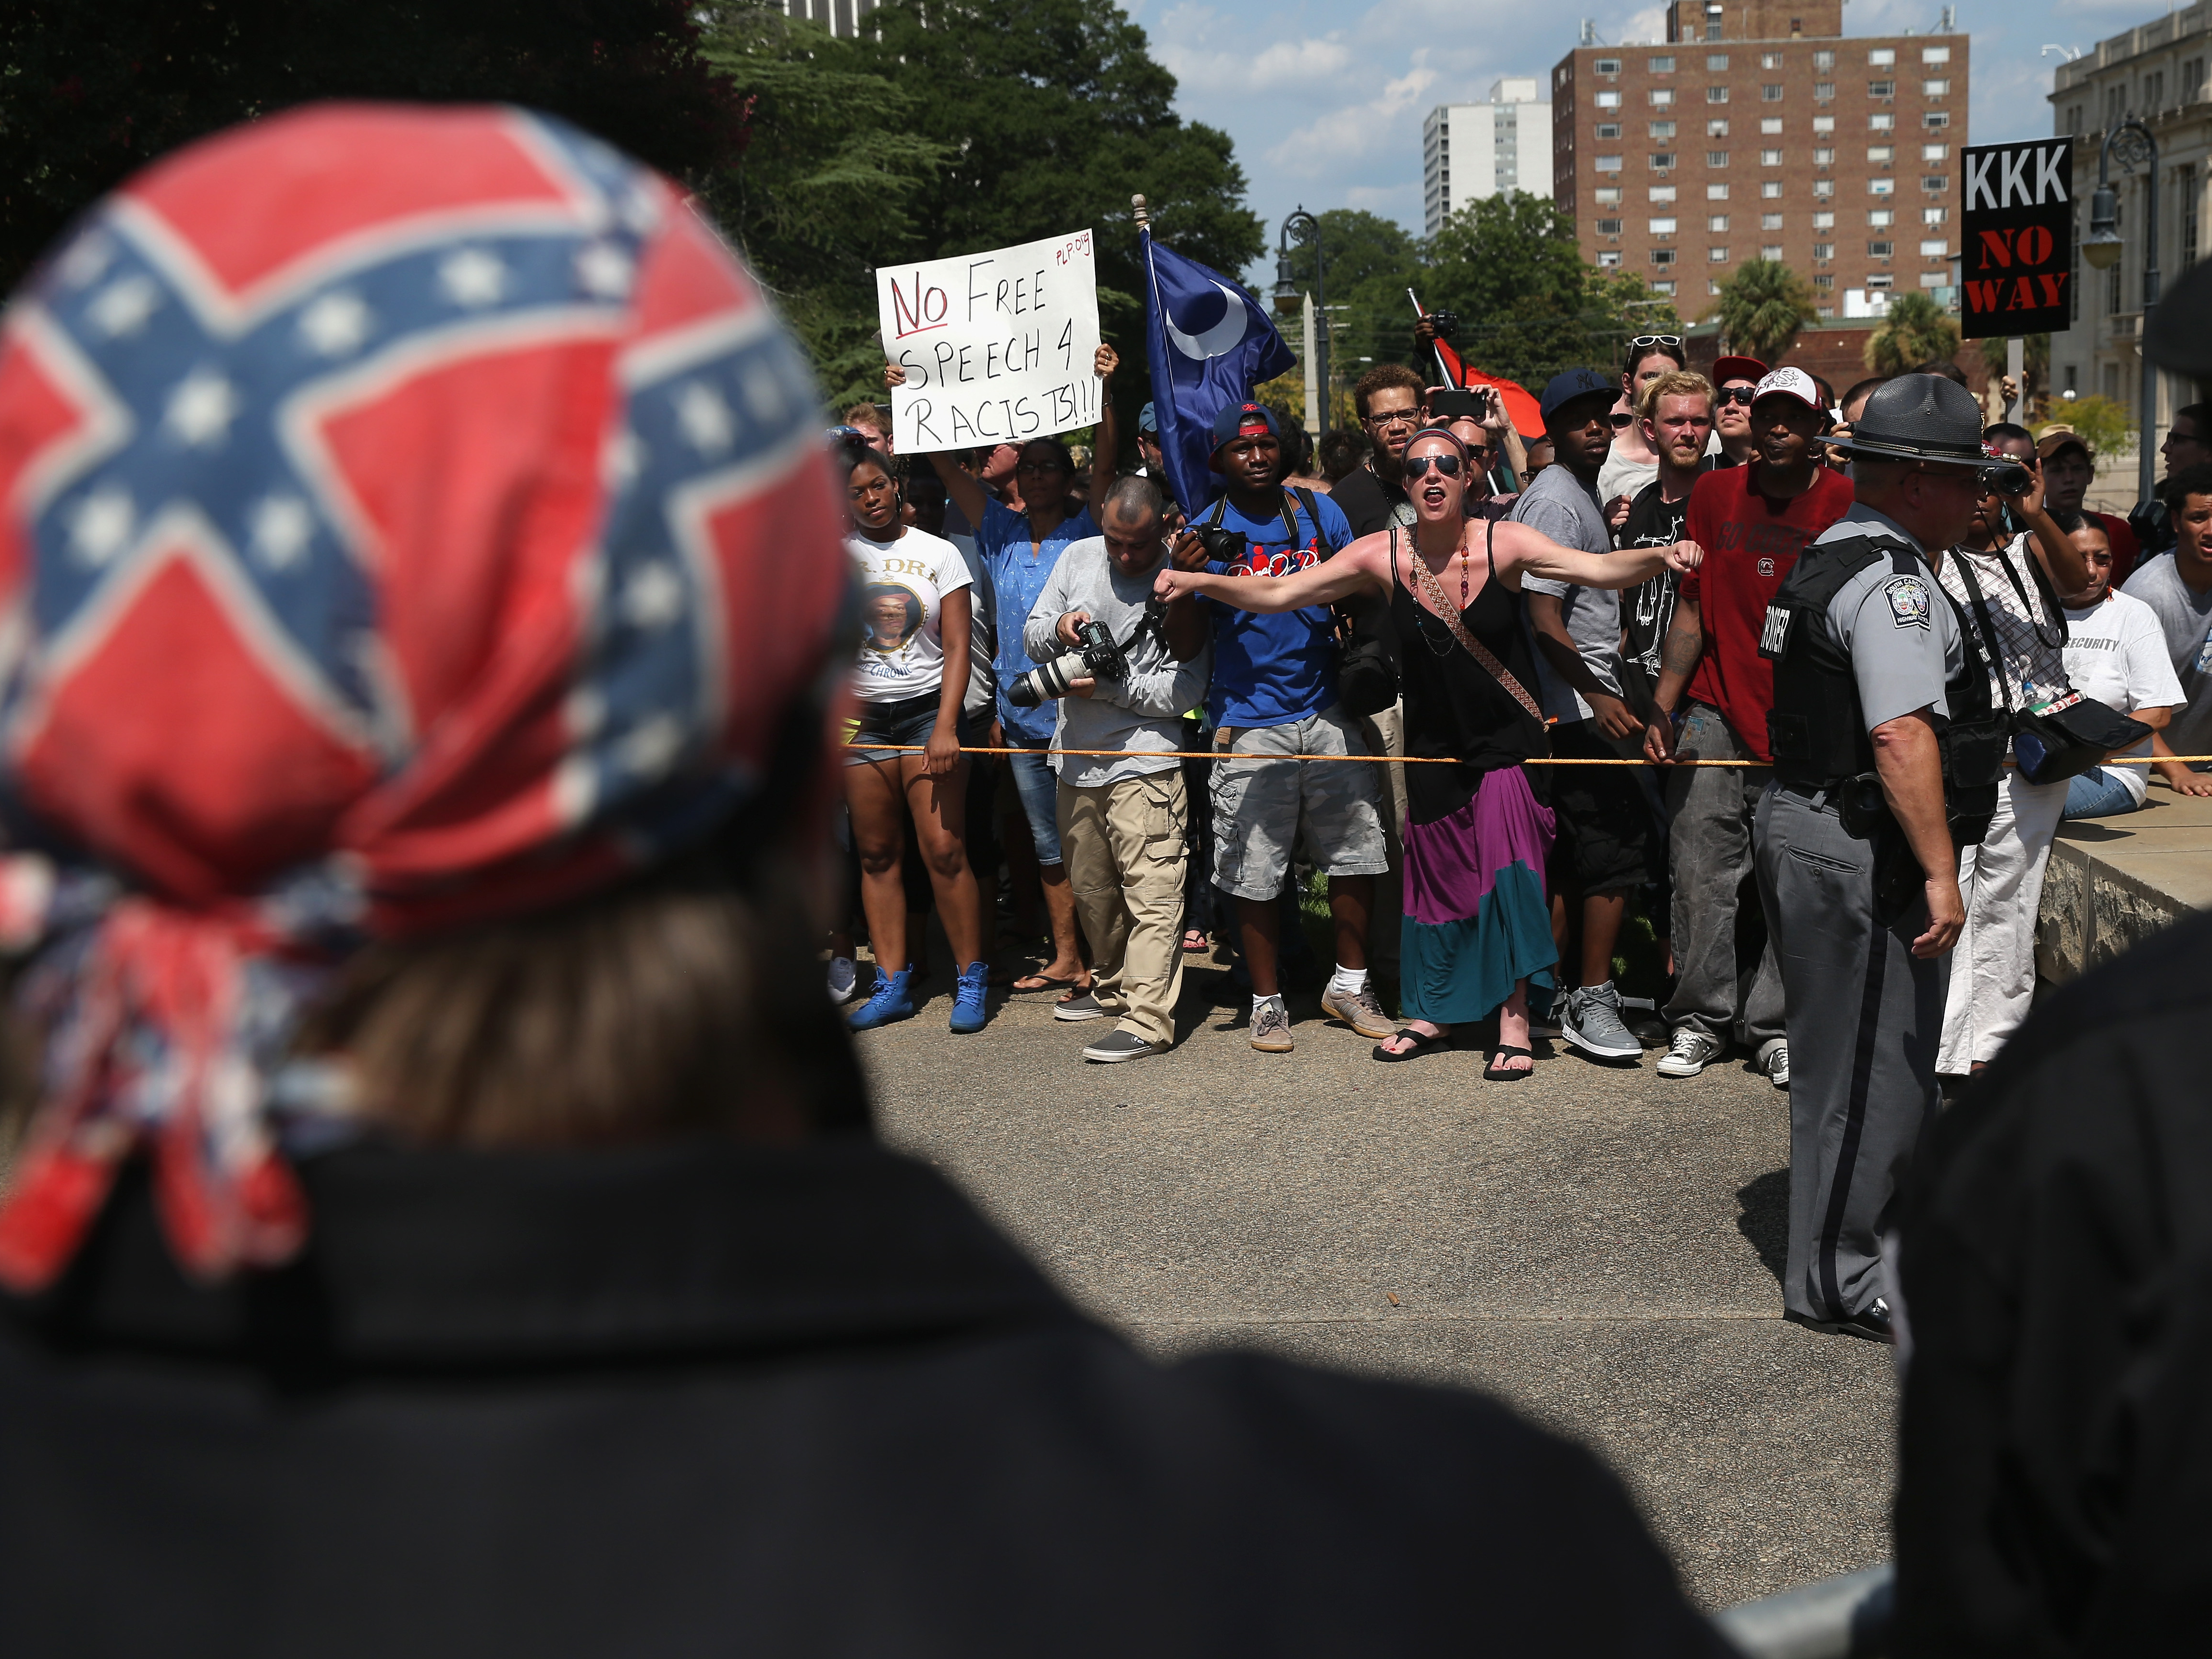 Protesters shout at Ku Klux Klan members at a Klan demonstration at the Statehouse on Saturday in Columbia, S.C. John Moore/AP